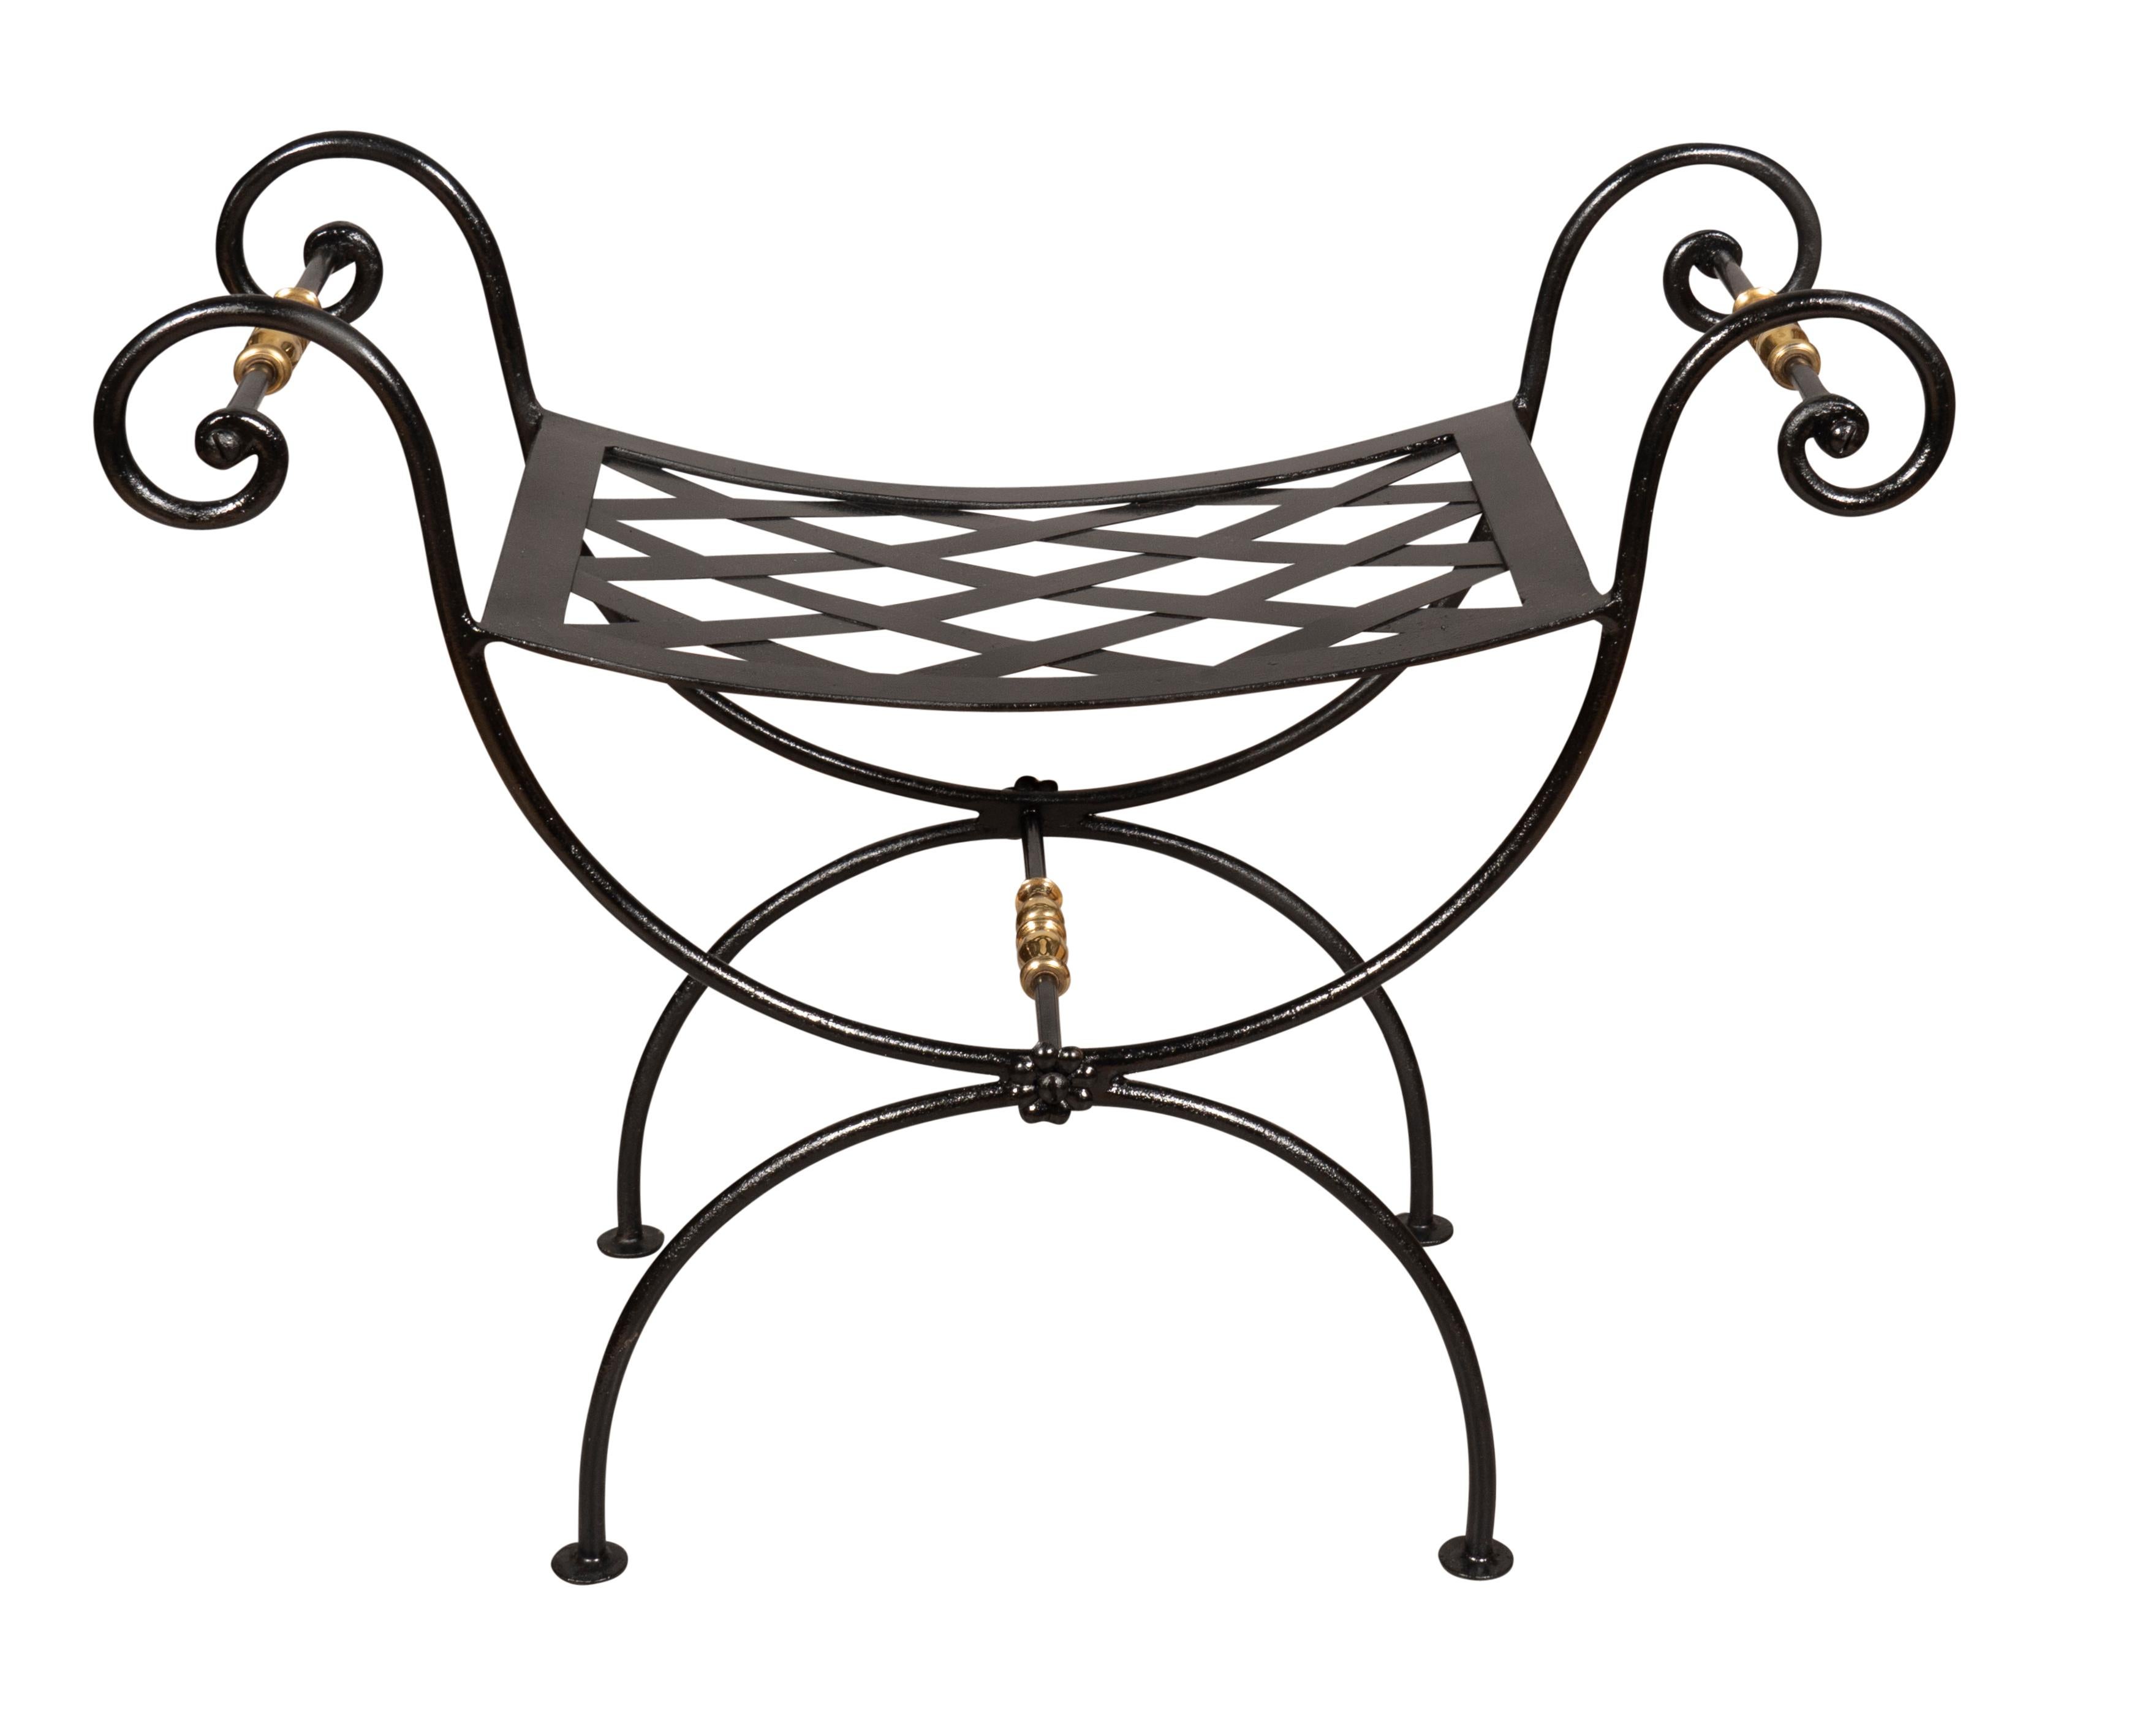 Each with scrolled arms with polished brass , metal woven seats, curule form legs.